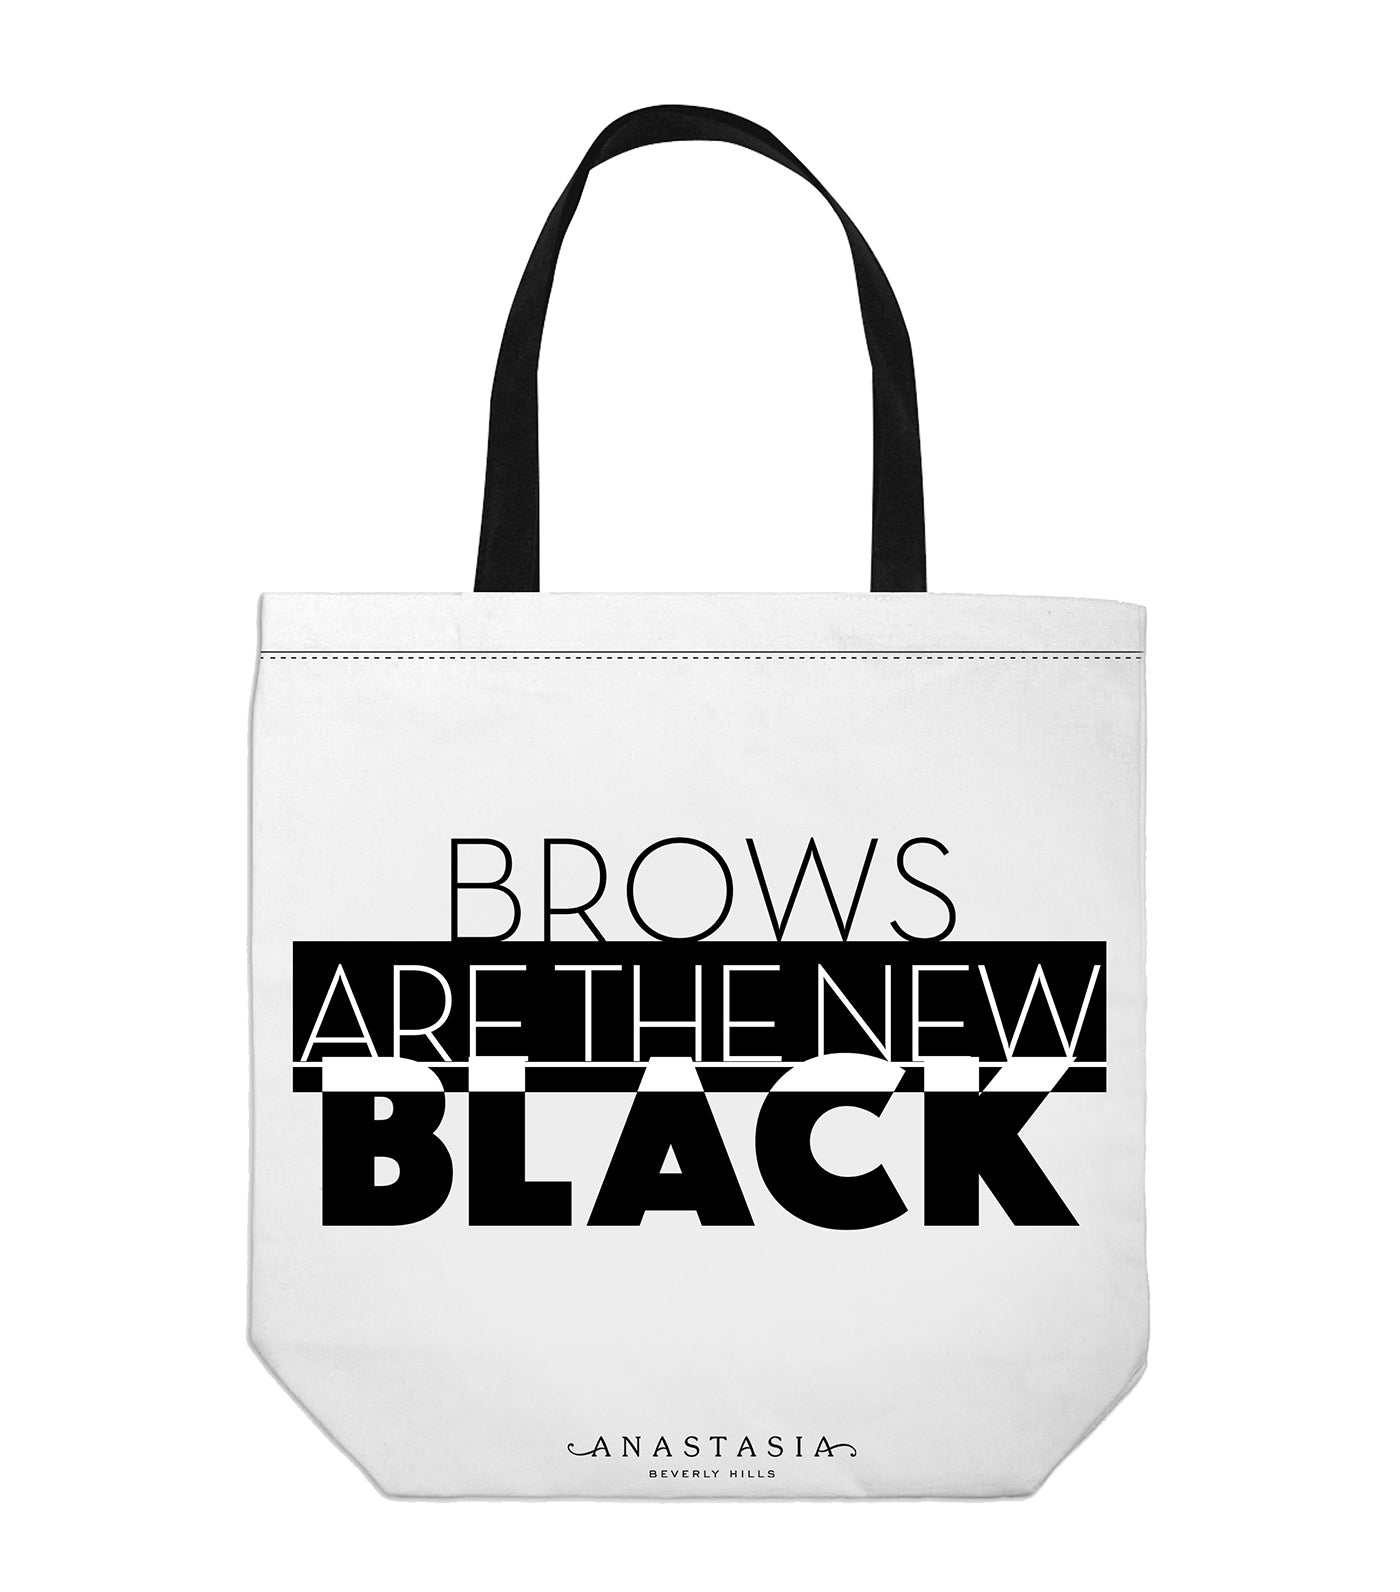 Anastasia Beverly Hills Free Limited-edition Brows is the New Black Tote Bag